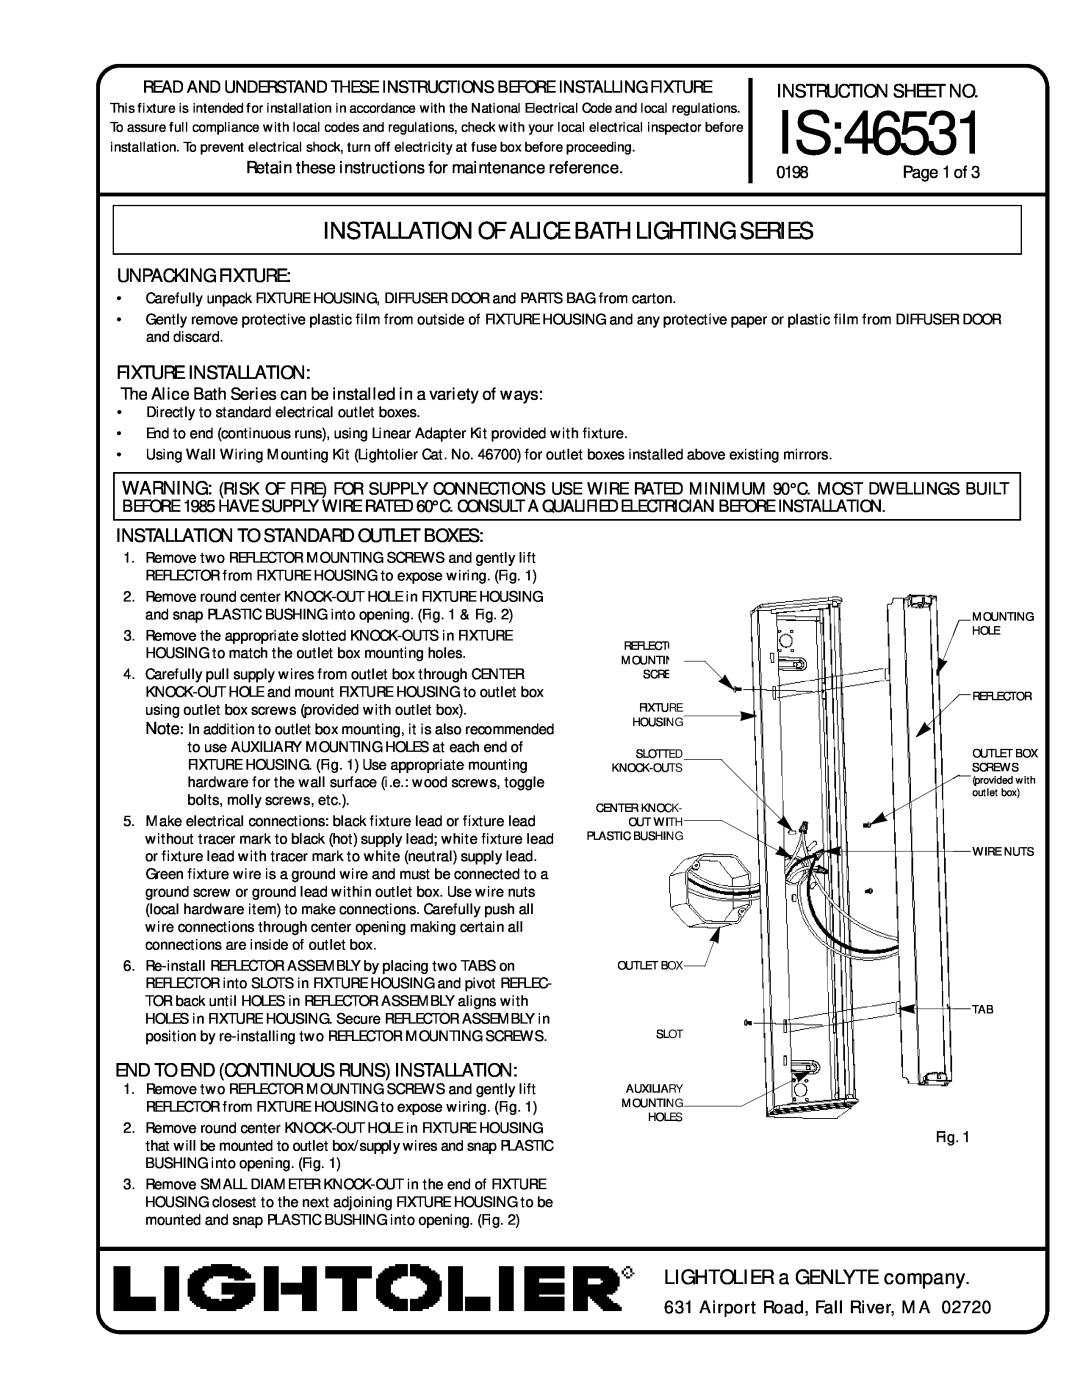 Lightolier IS:46531 instruction sheet Is, LIGHTOLIER a GENLYTE company, Airport Road, Fall River, MA, Instruction Sheet No 